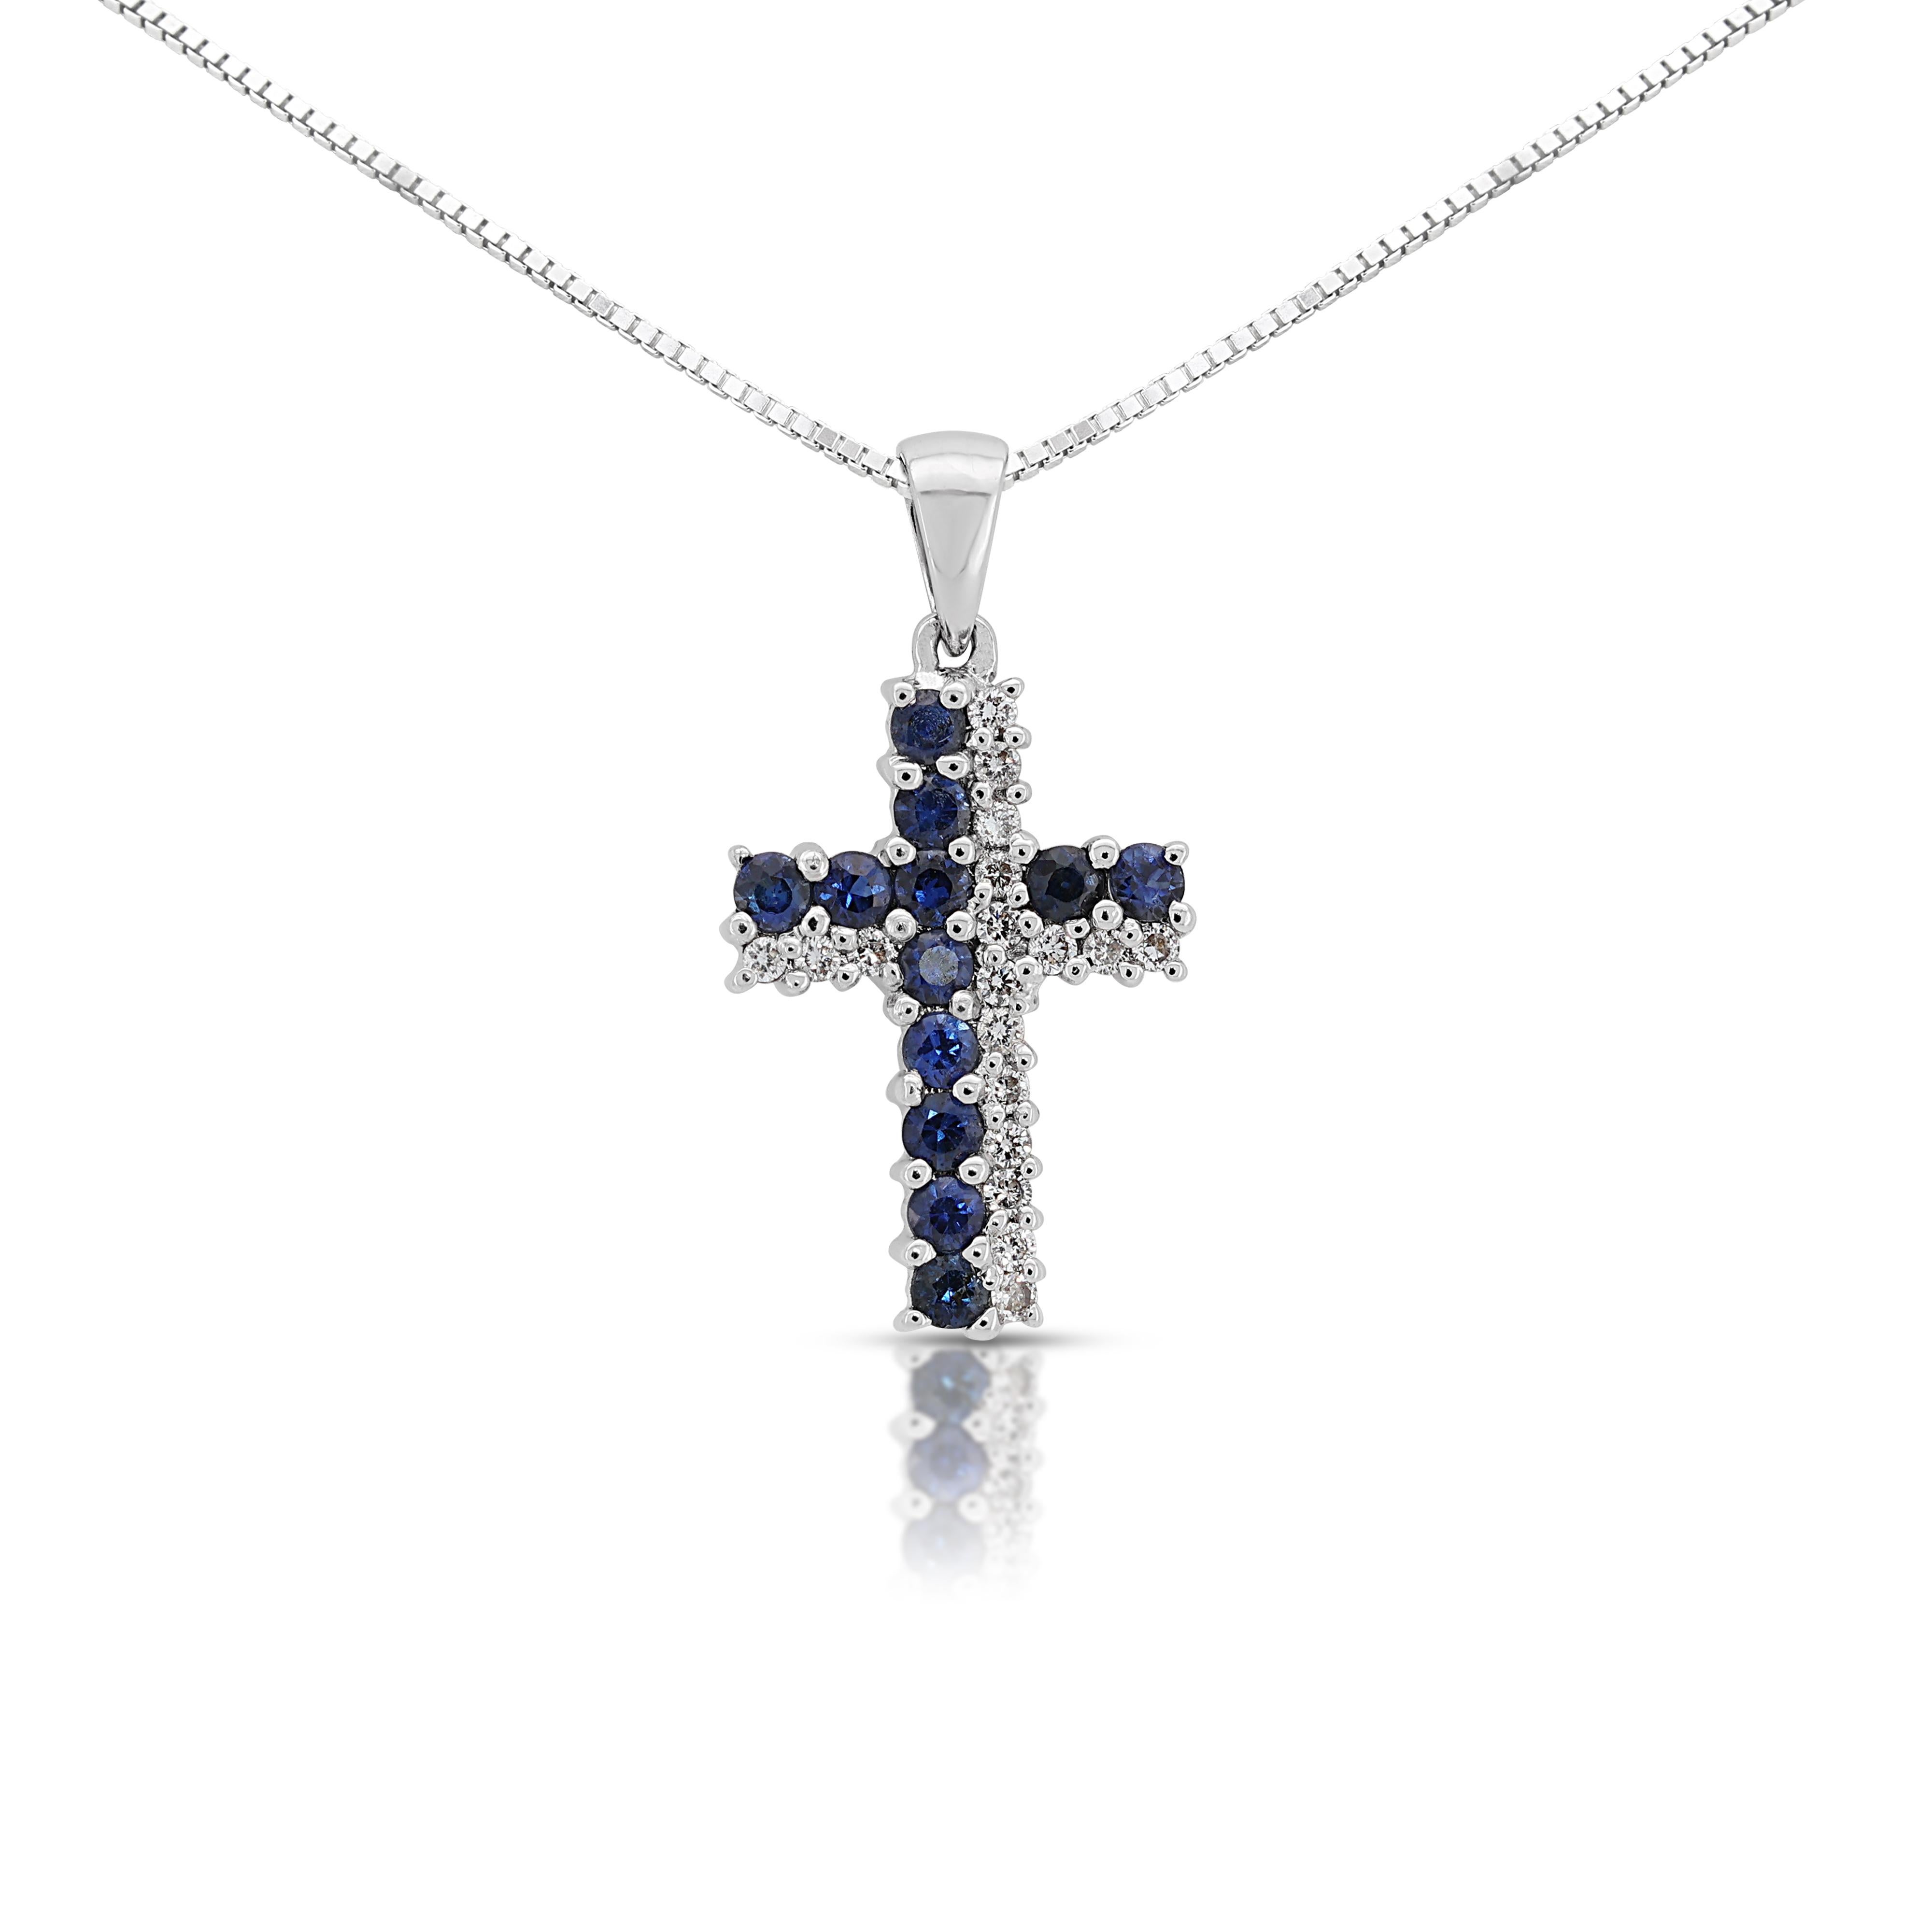 This enchanting cross pendant features a dazzling display of gemstones, meticulously set in gleaming 18K white gold. The centerpiece showcases 12 captivating round brilliant sapphires boasting a combined weight of 0.42 carats and a mesmerizing blue